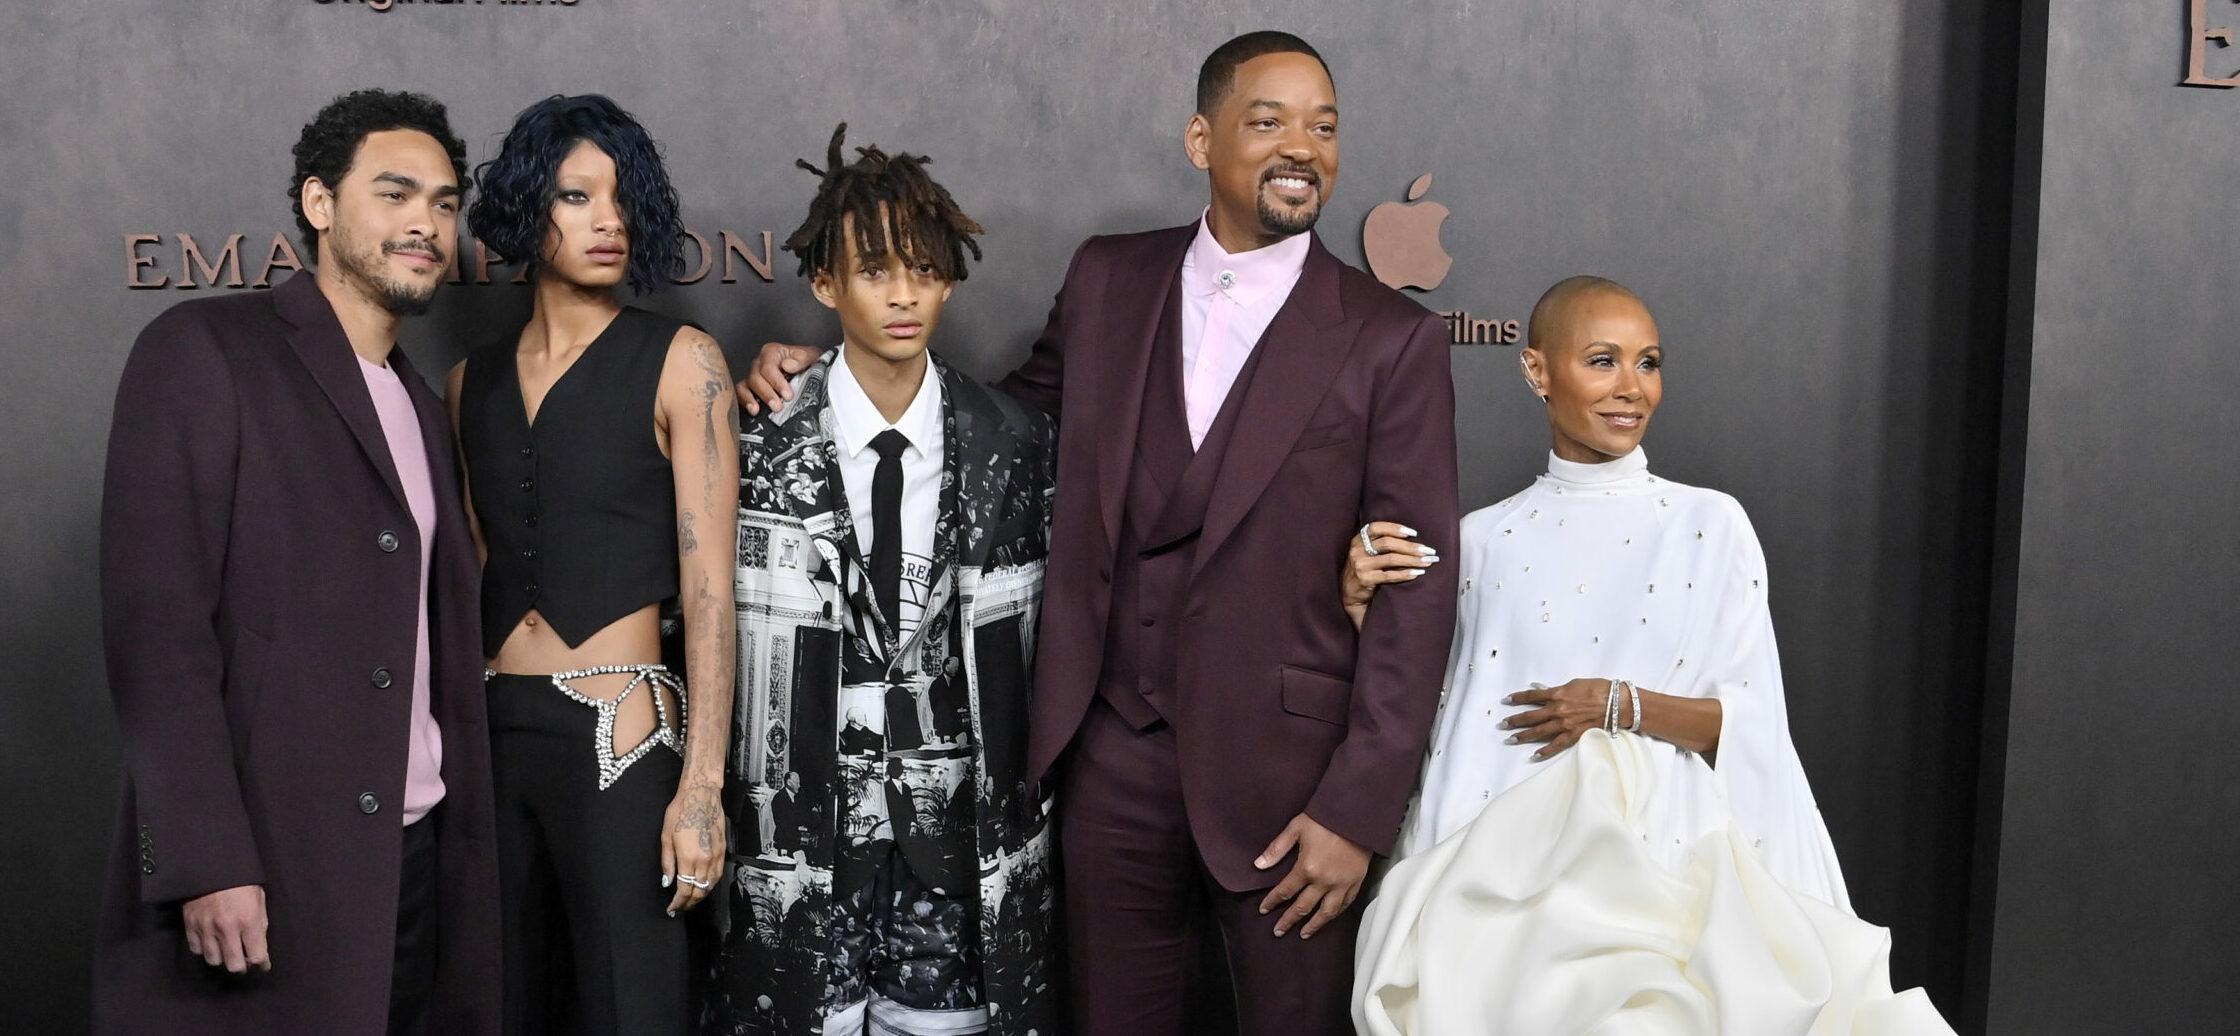 Will Smith, Jada Pinkett Smith and Family(Trey Smith, Willow Smith, Jaden Smith) Attend the "Emancipation" Premiere in Los Angeles